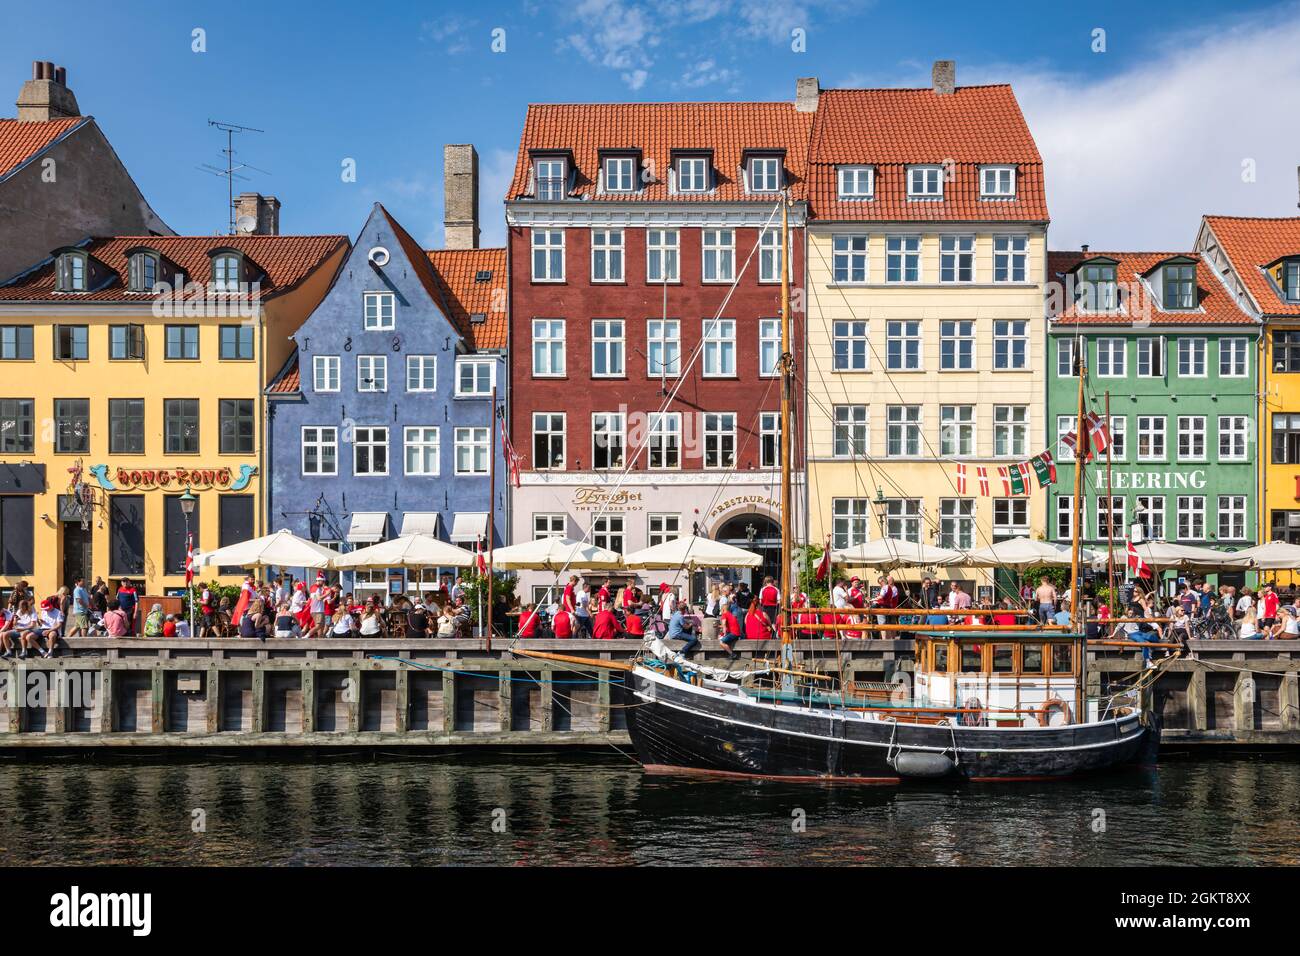 Colored houses and sailing boats on Nyhavn Canal, Copenhagen, Denmark Stock Photo